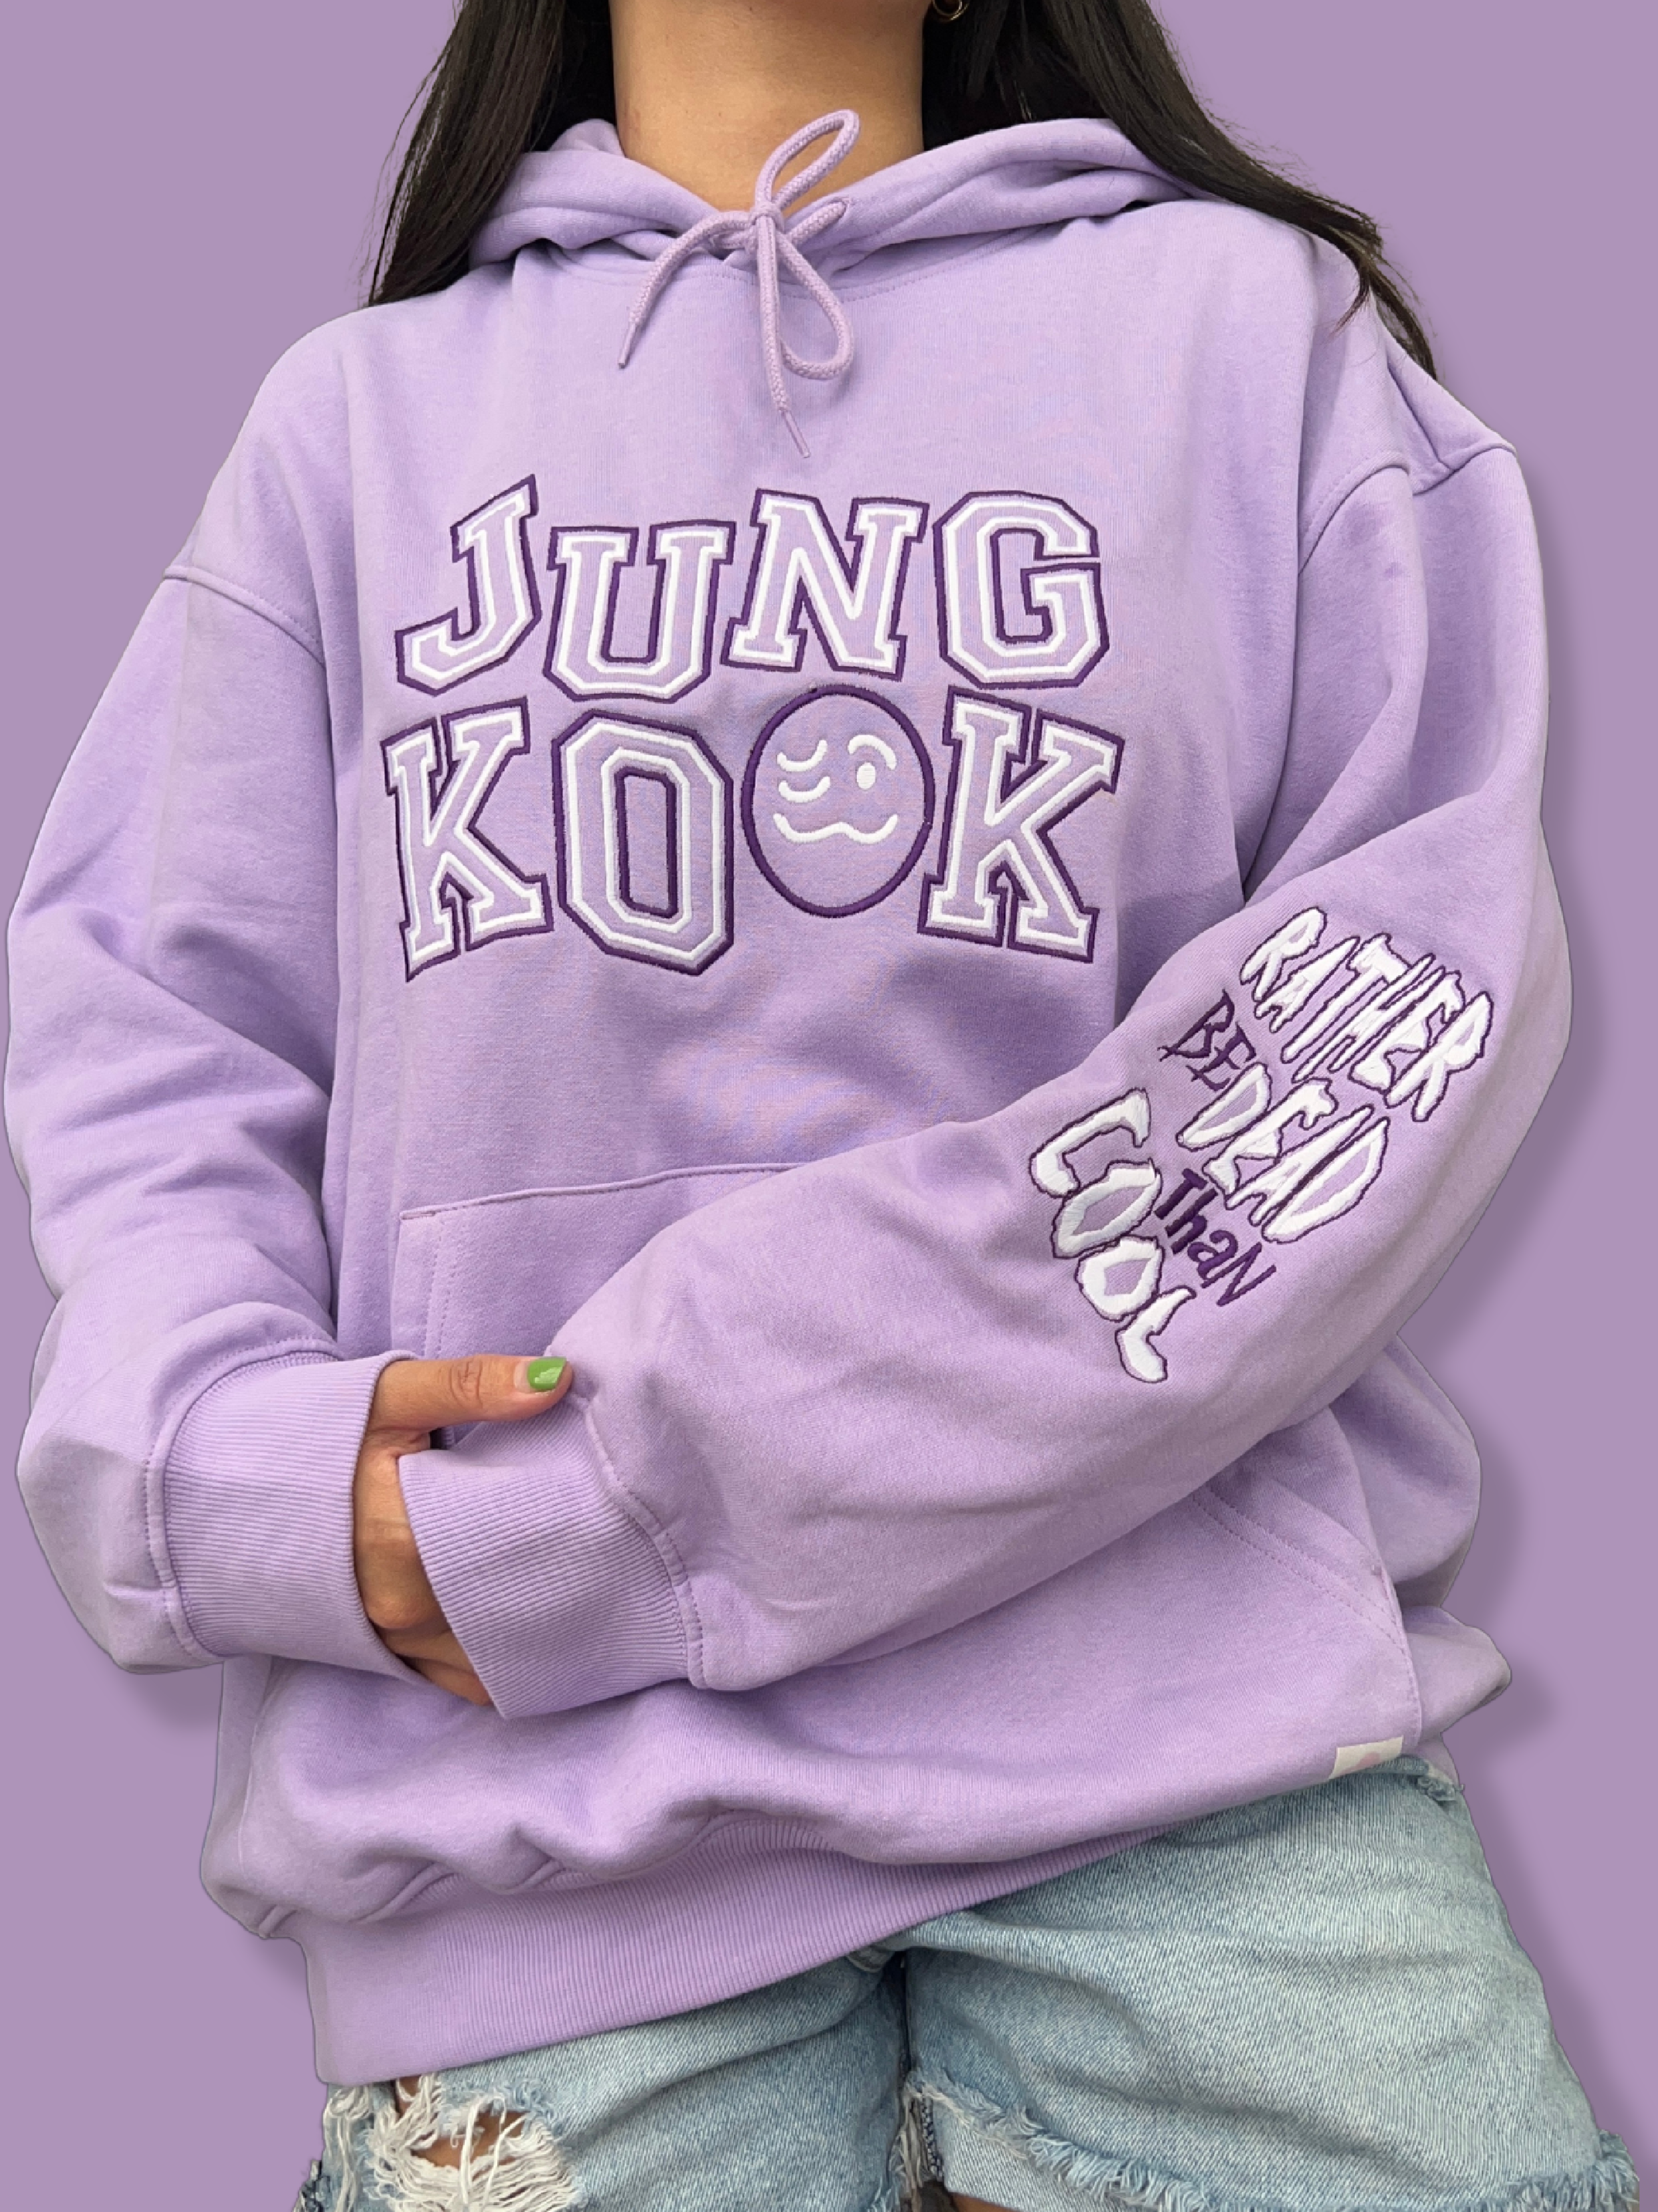 JEON JUNGKOOK EMBROIDERED SWEATSHIRT (UP TO 4 WEEKS PROCESSING)